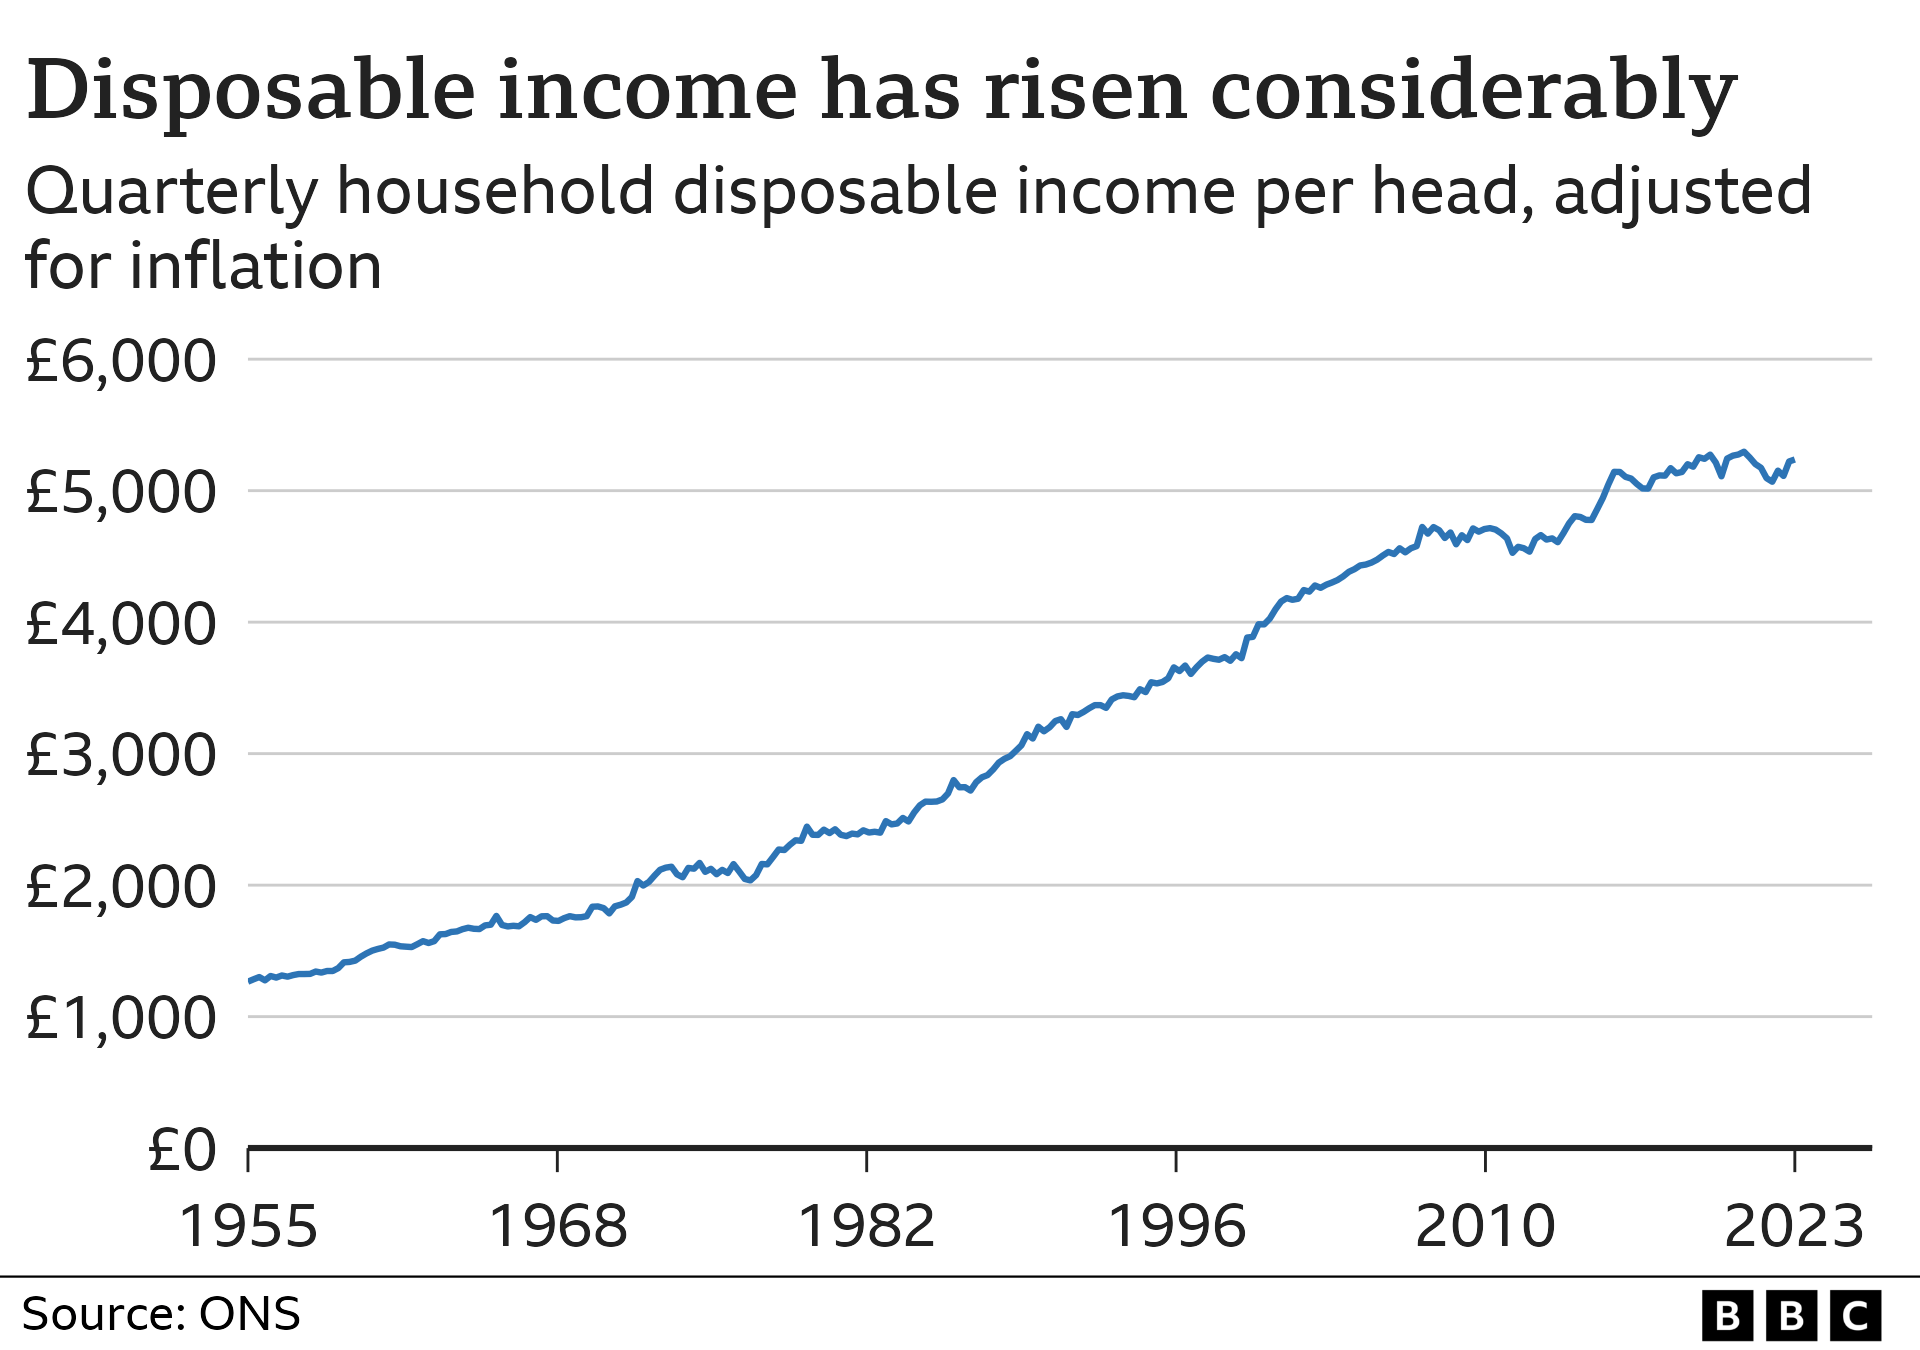 Real household disposable income grew from £1,266 in Q1 1955 to £5,237 in Q3 2023